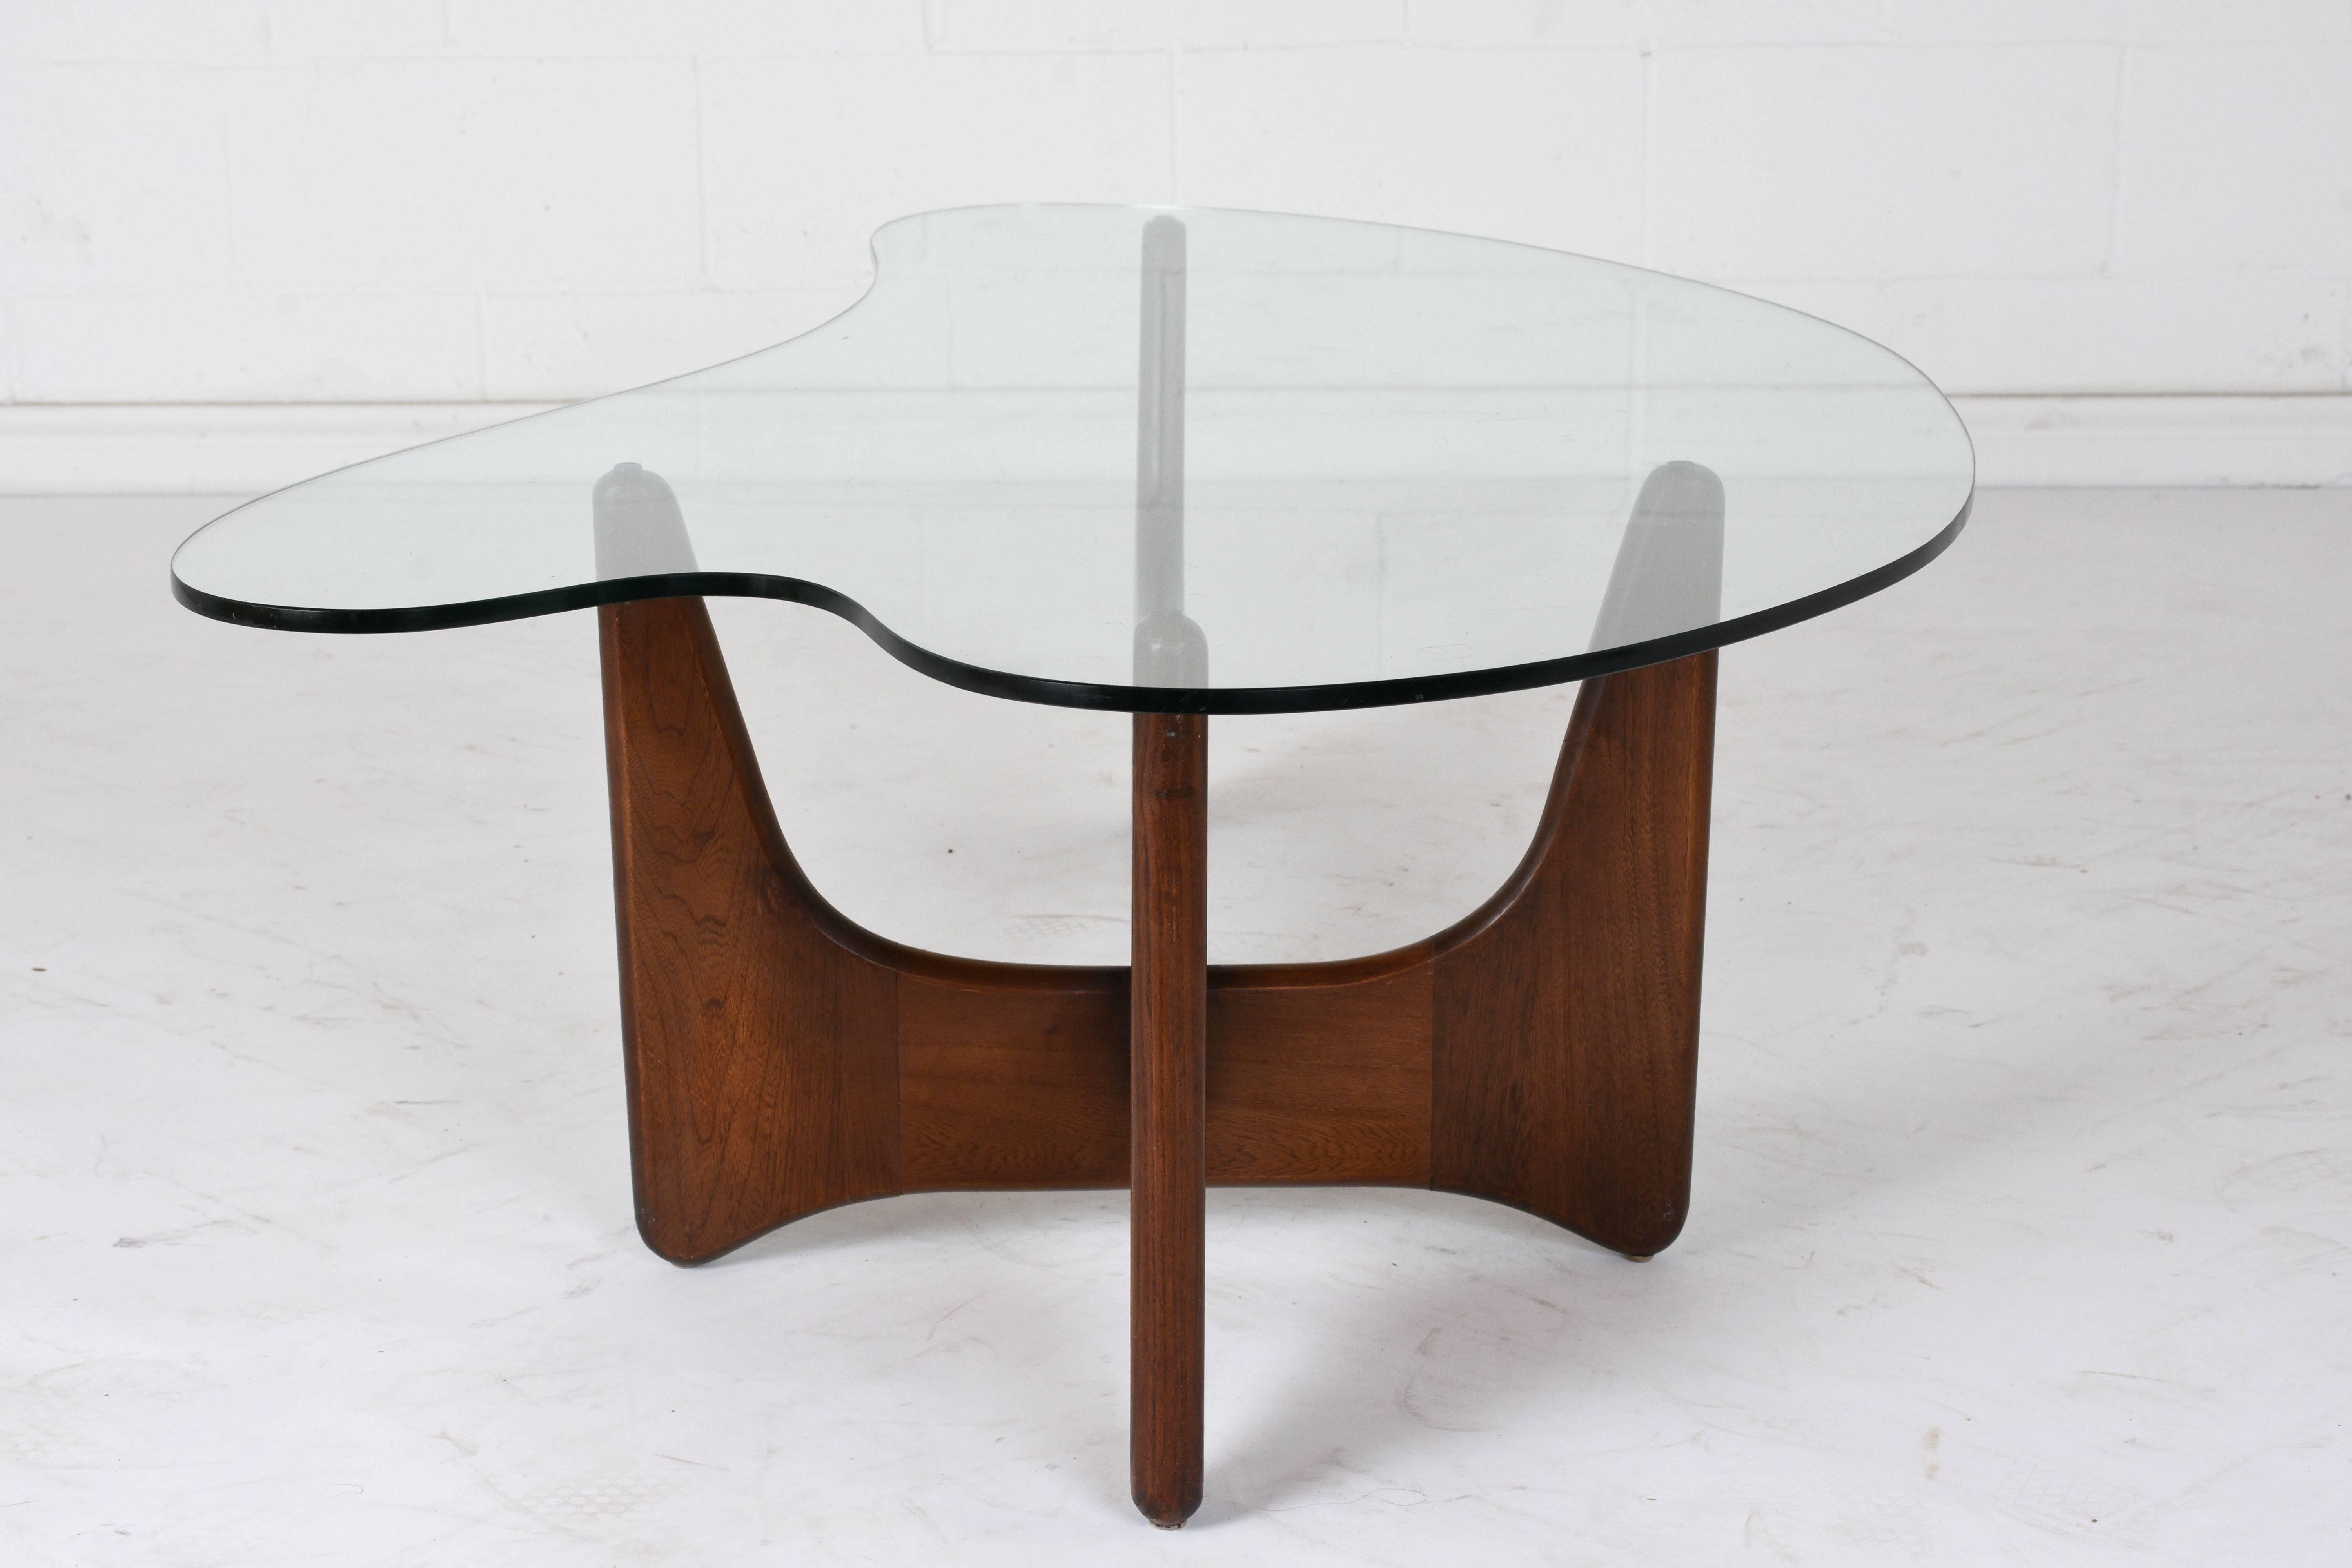 20th Century Mid-Century Modern Adrian Pearsall Style Coffee Table